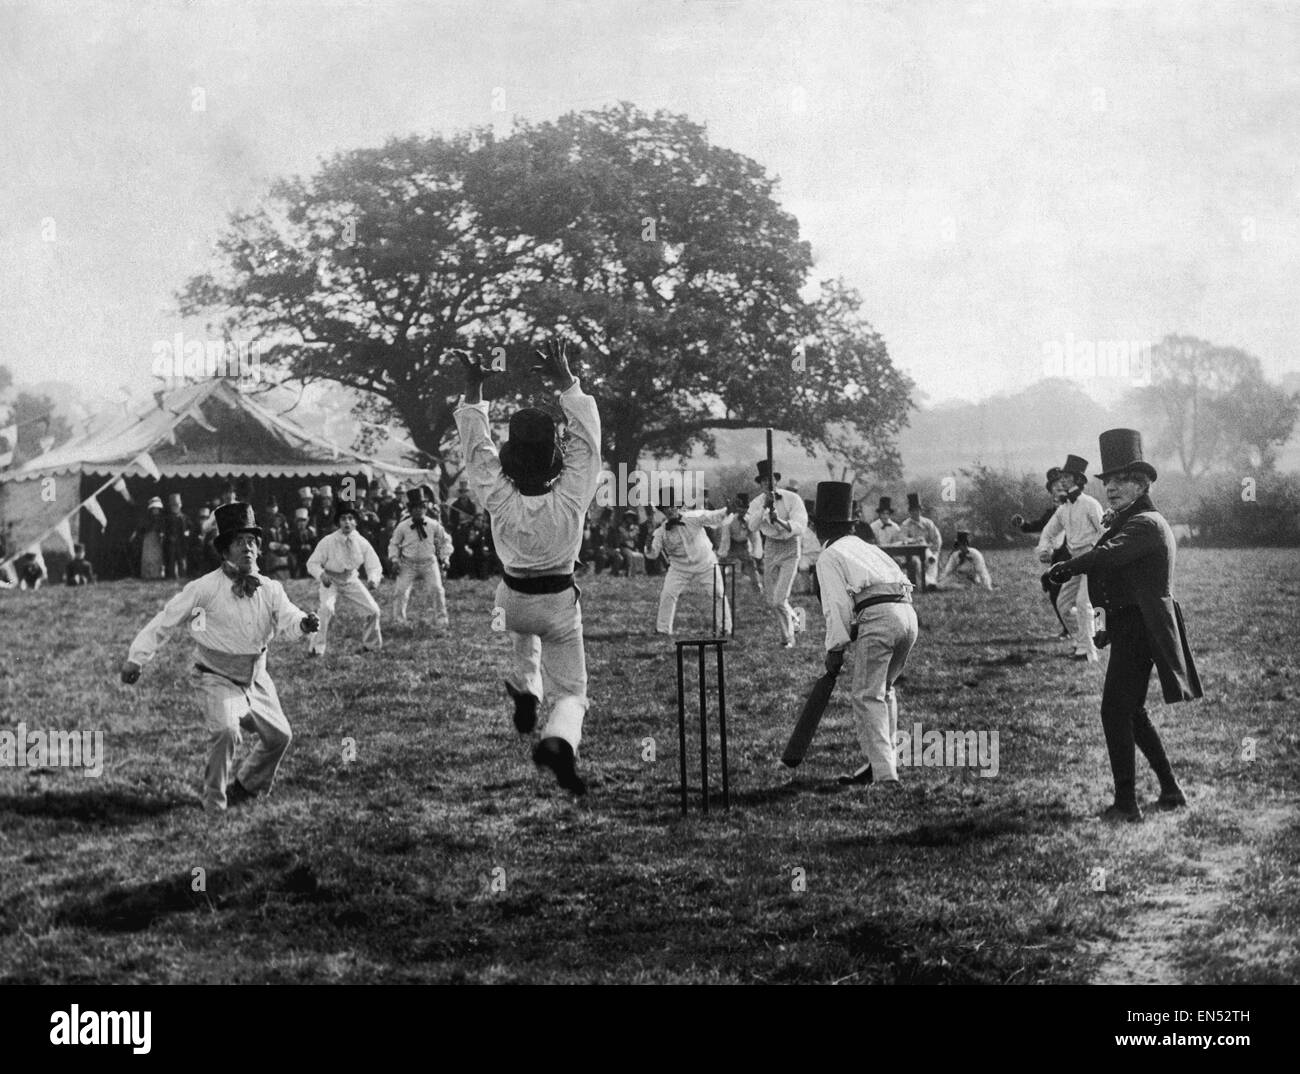 Pickwickian cricket match being produced by the Ideal Film Company at Elstree. 27th September 1921. Stock Photo